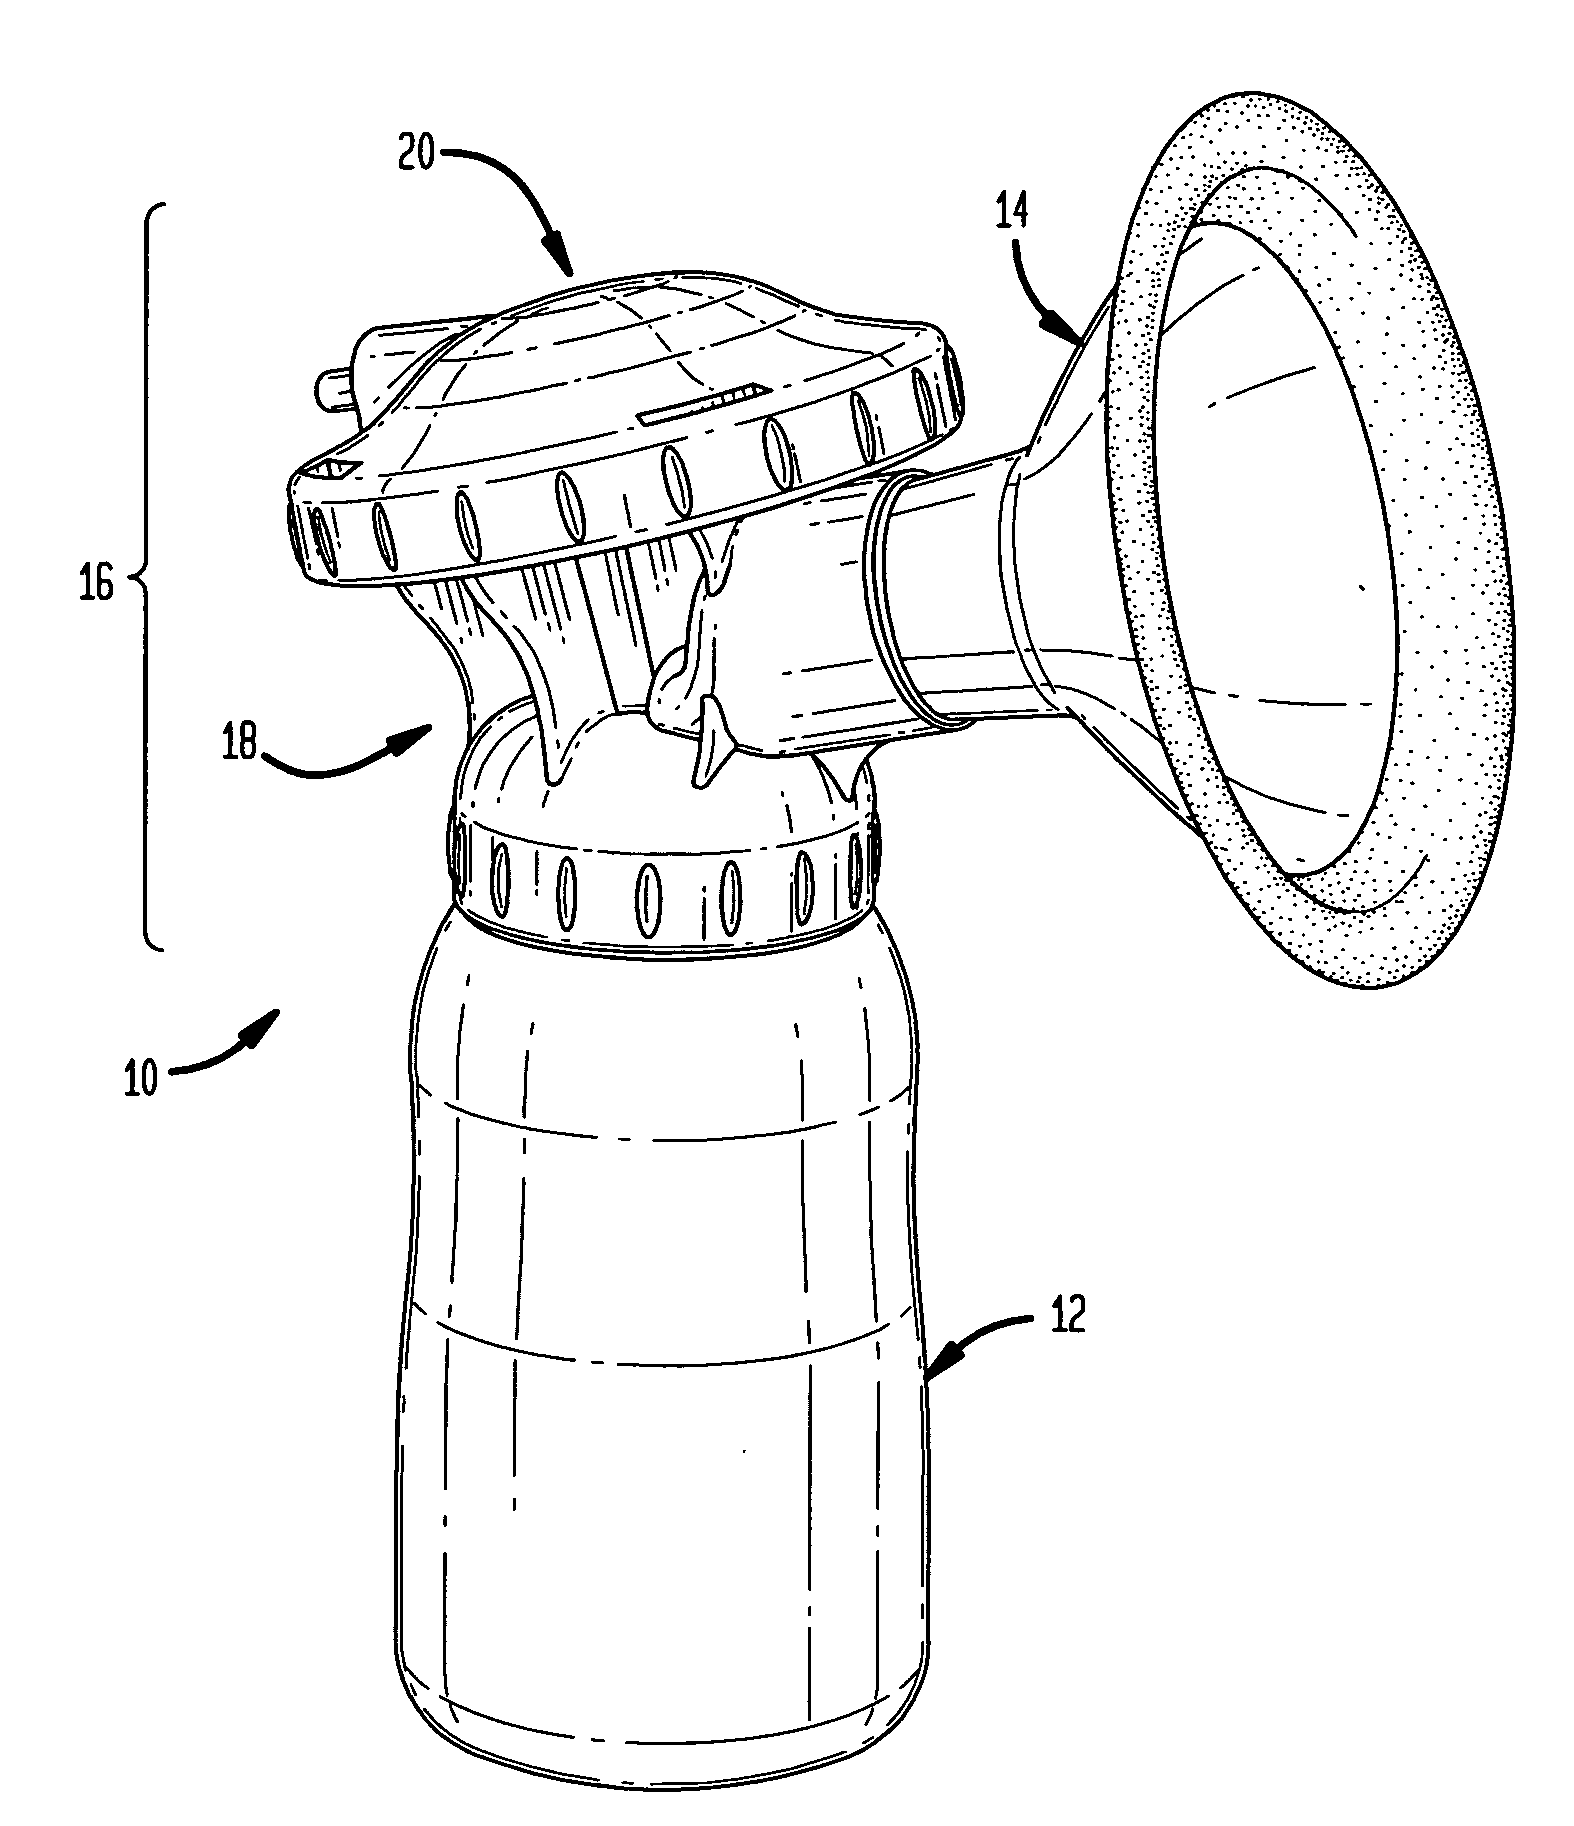 Breast milk collection apparatus and components thereof